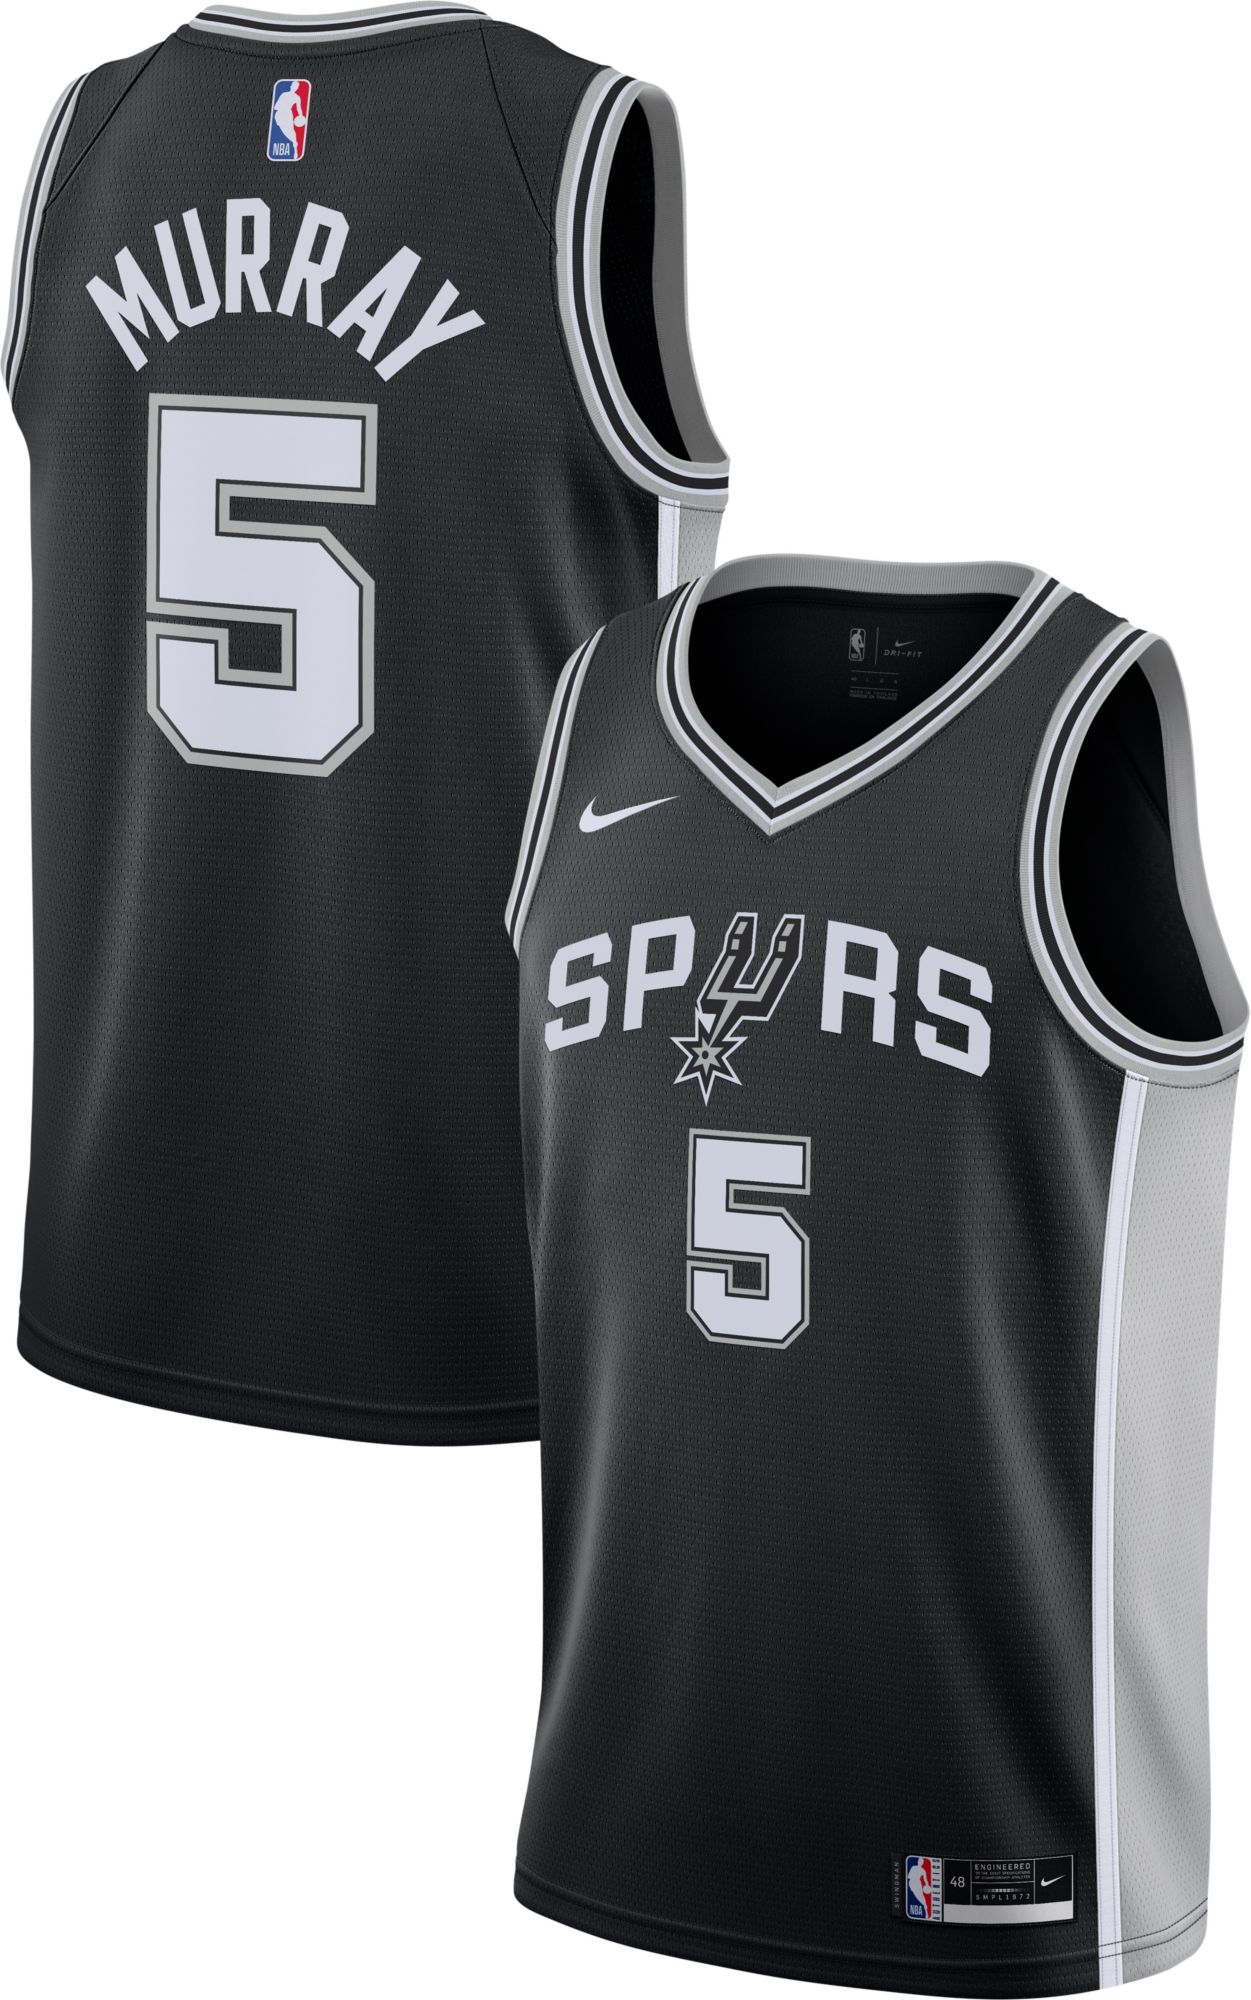 San Antonio Spurs Jerseys  Curbside Pickup Available at DICK'S